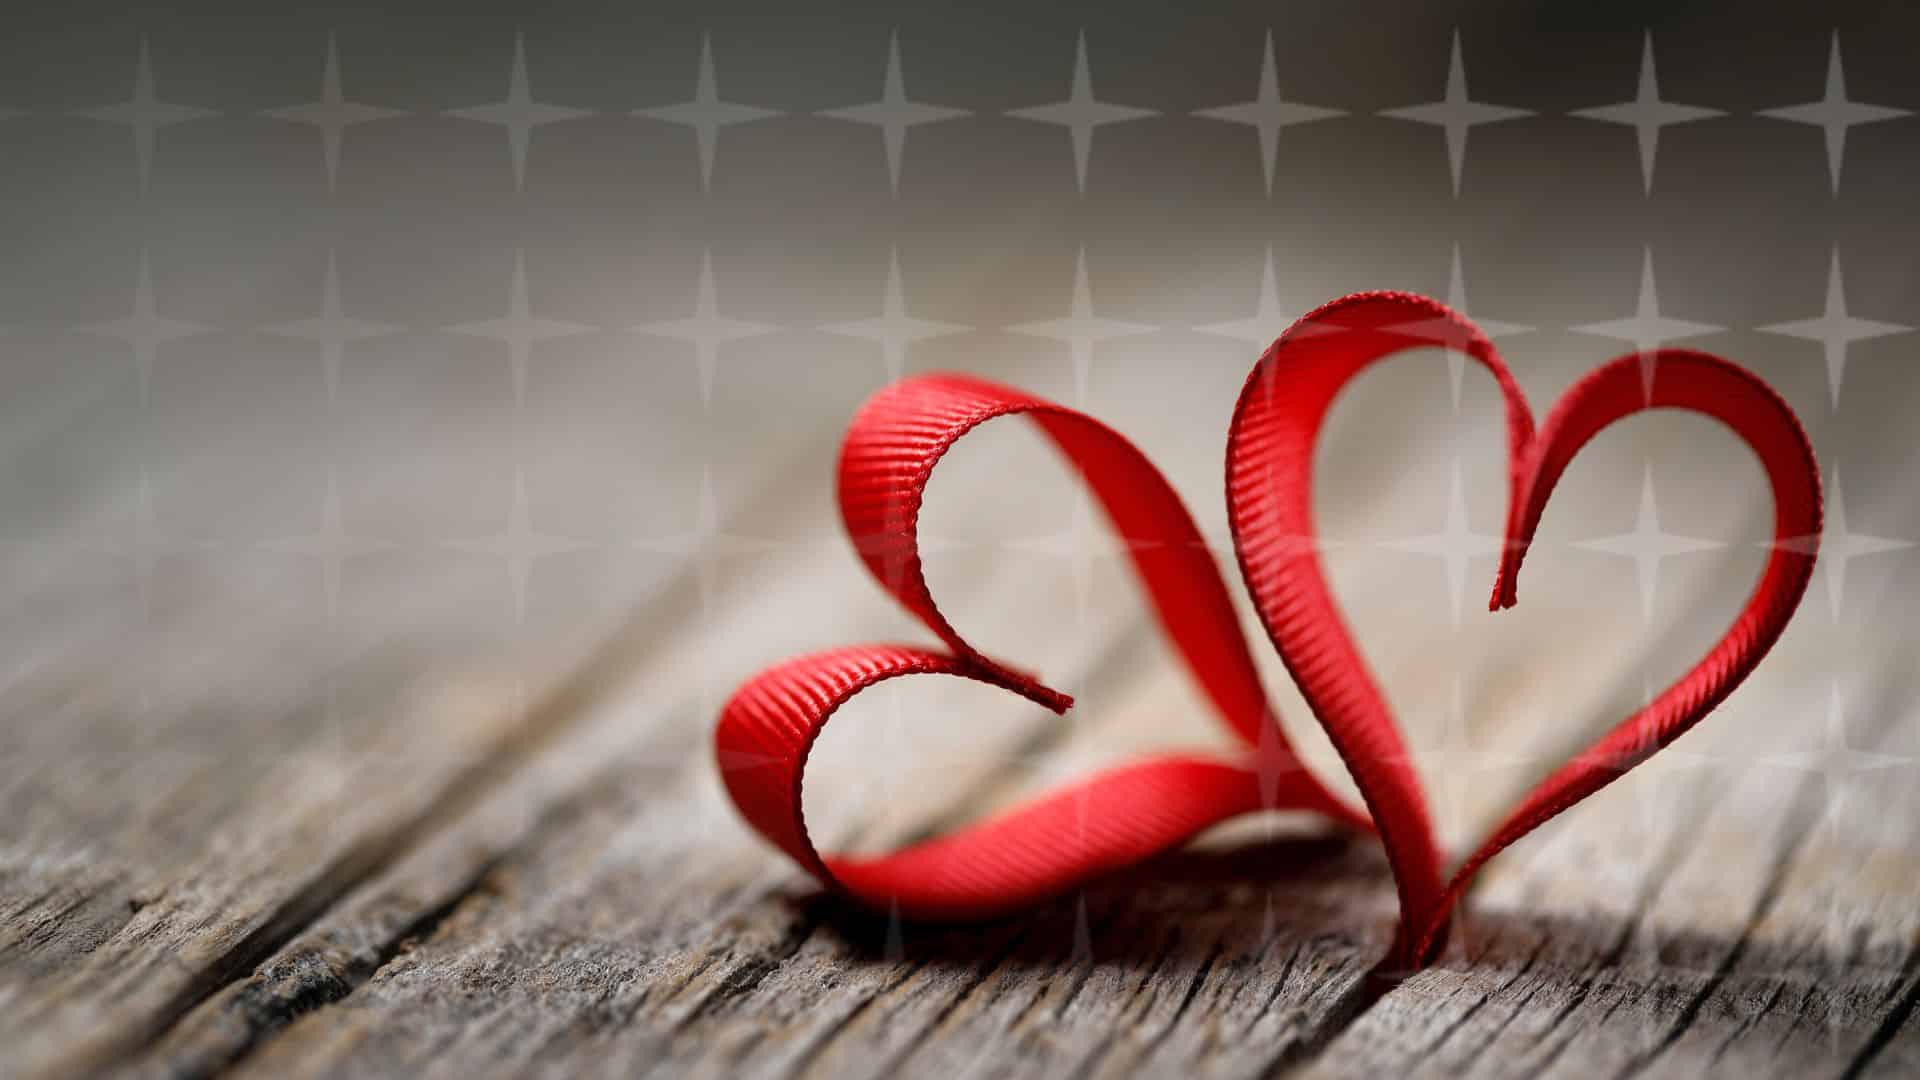 Two red ribbons in the shape of a heart resting on a wooden table.